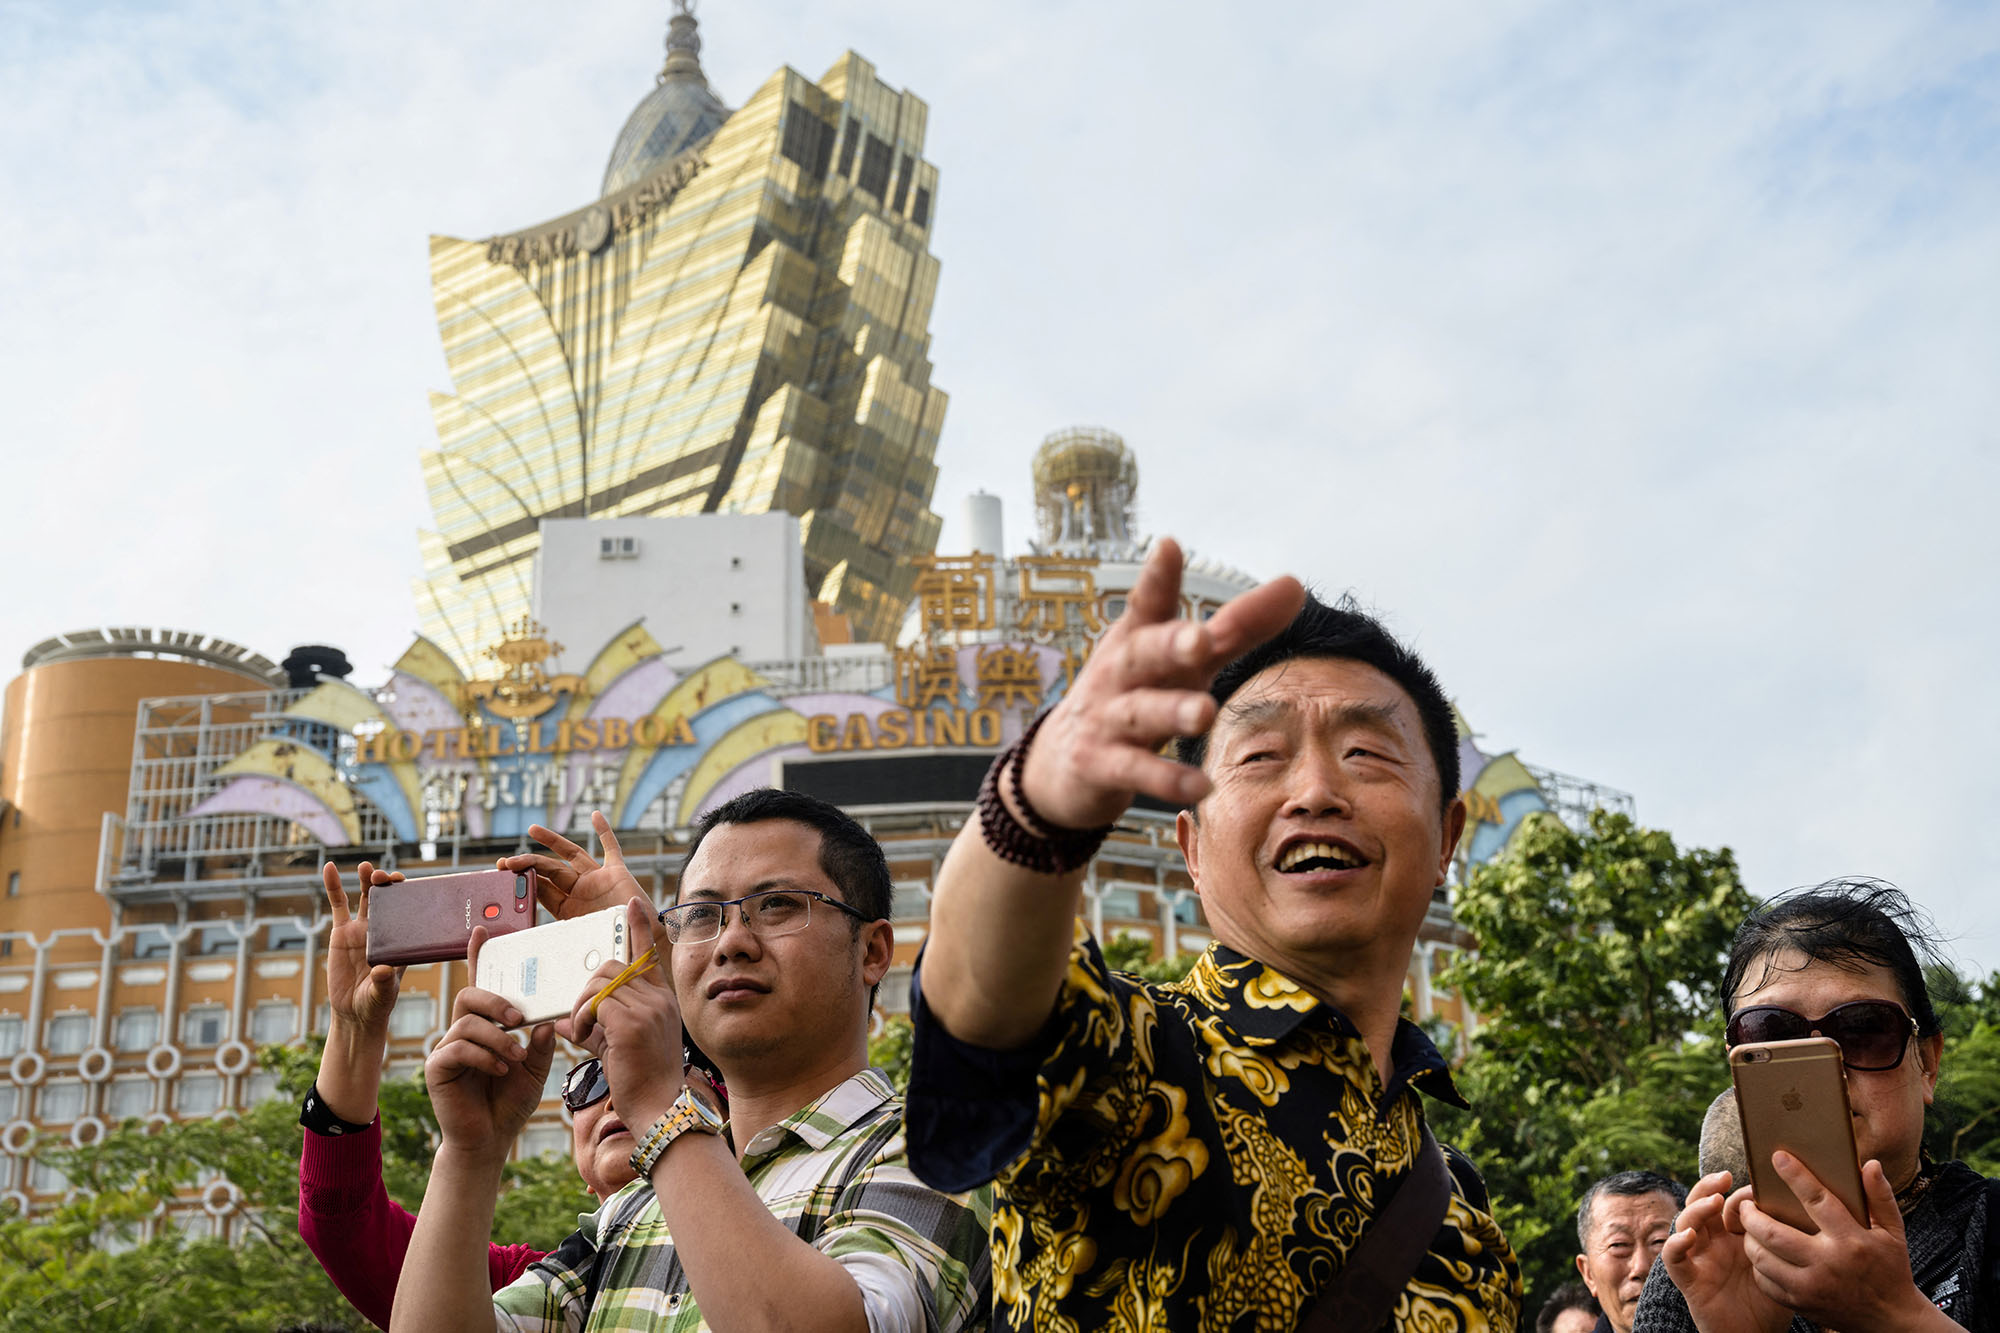 In this photo taken on March 5, 2019, visitors take photos near the Grand Lisboa (back C) casino resort in Macau. - The trade war may have sent ripples of uncertainty through the world's second-largest economy but one corner of China has so far remained steadfastly buoyant -- the gambling enclave of Macau. (Photo by Anthony WALLACE, AFP)